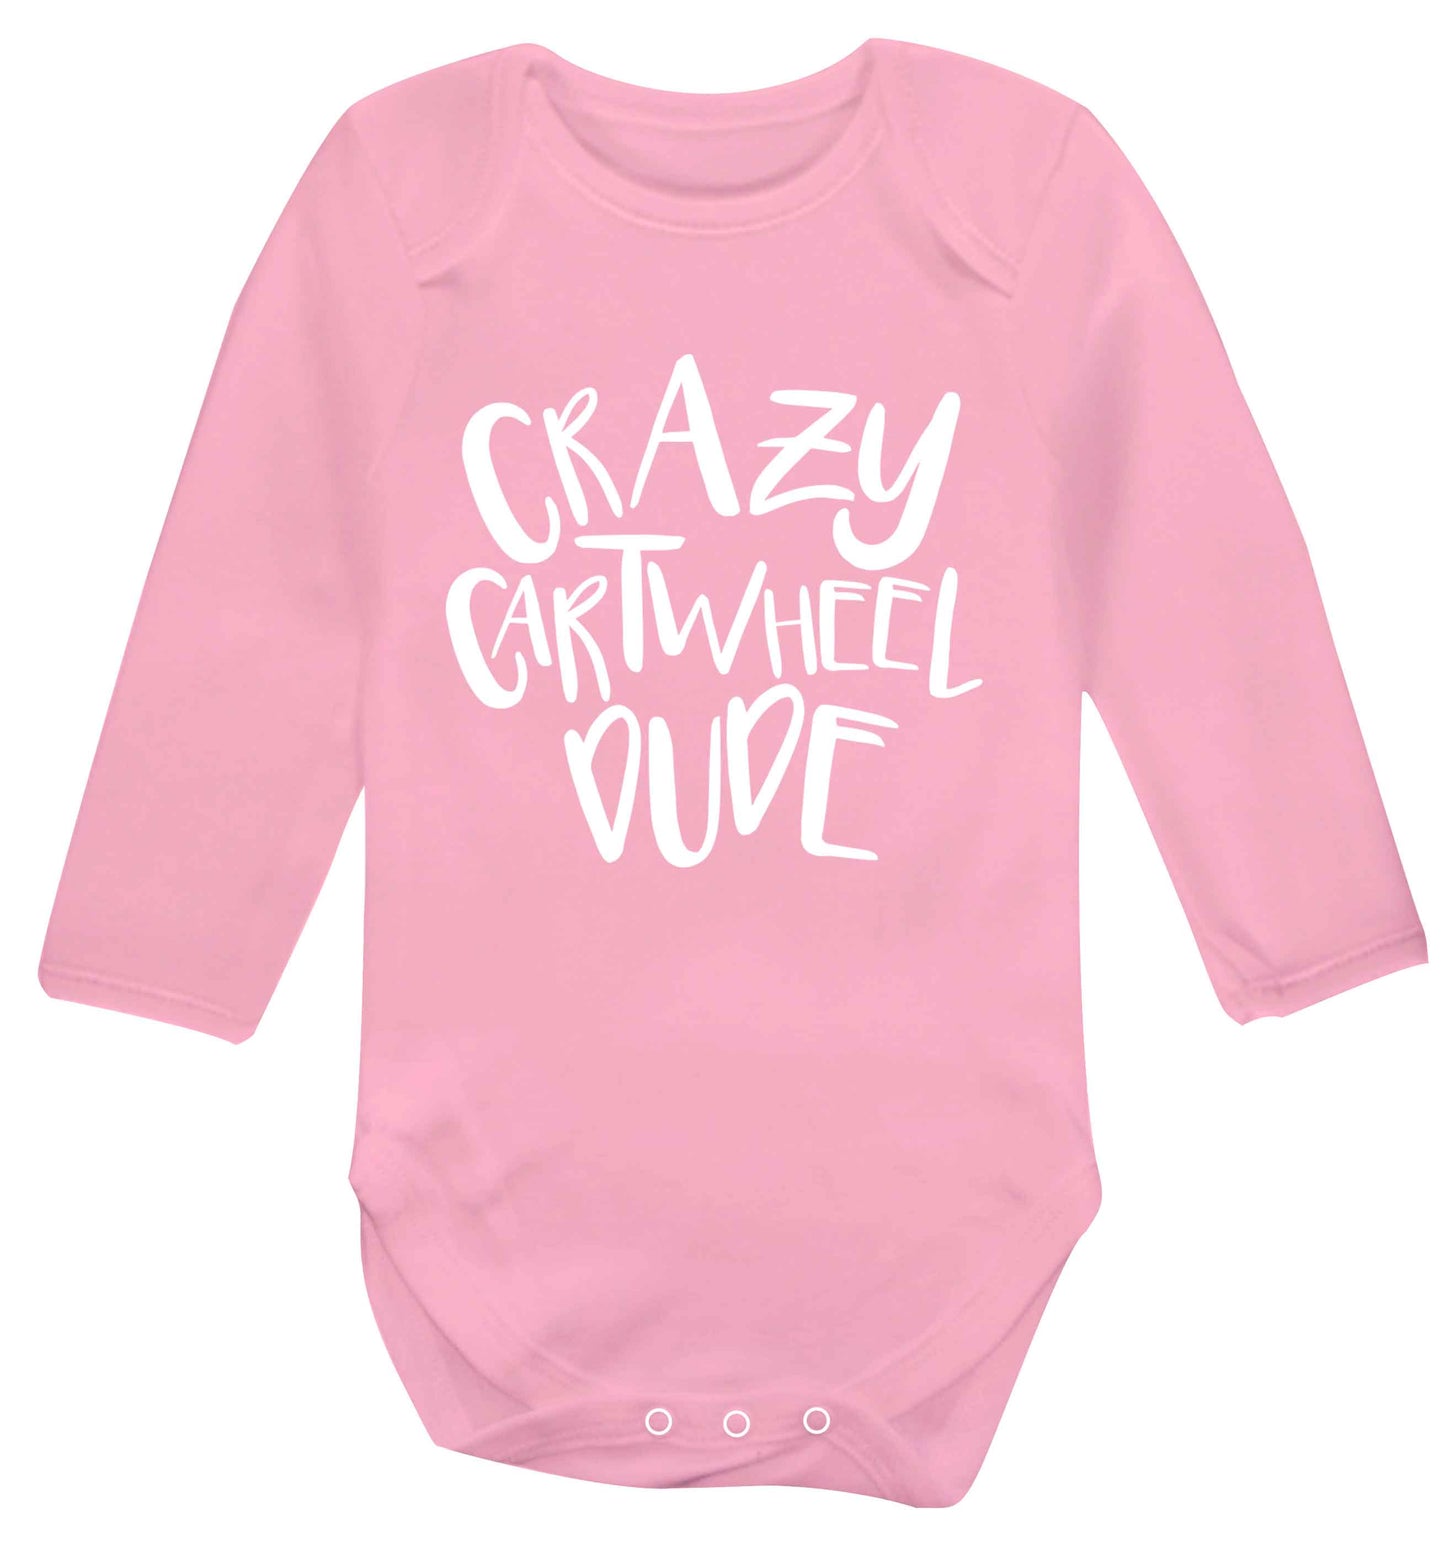 Crazy cartwheel dude Baby Vest long sleeved pale pink 6-12 months